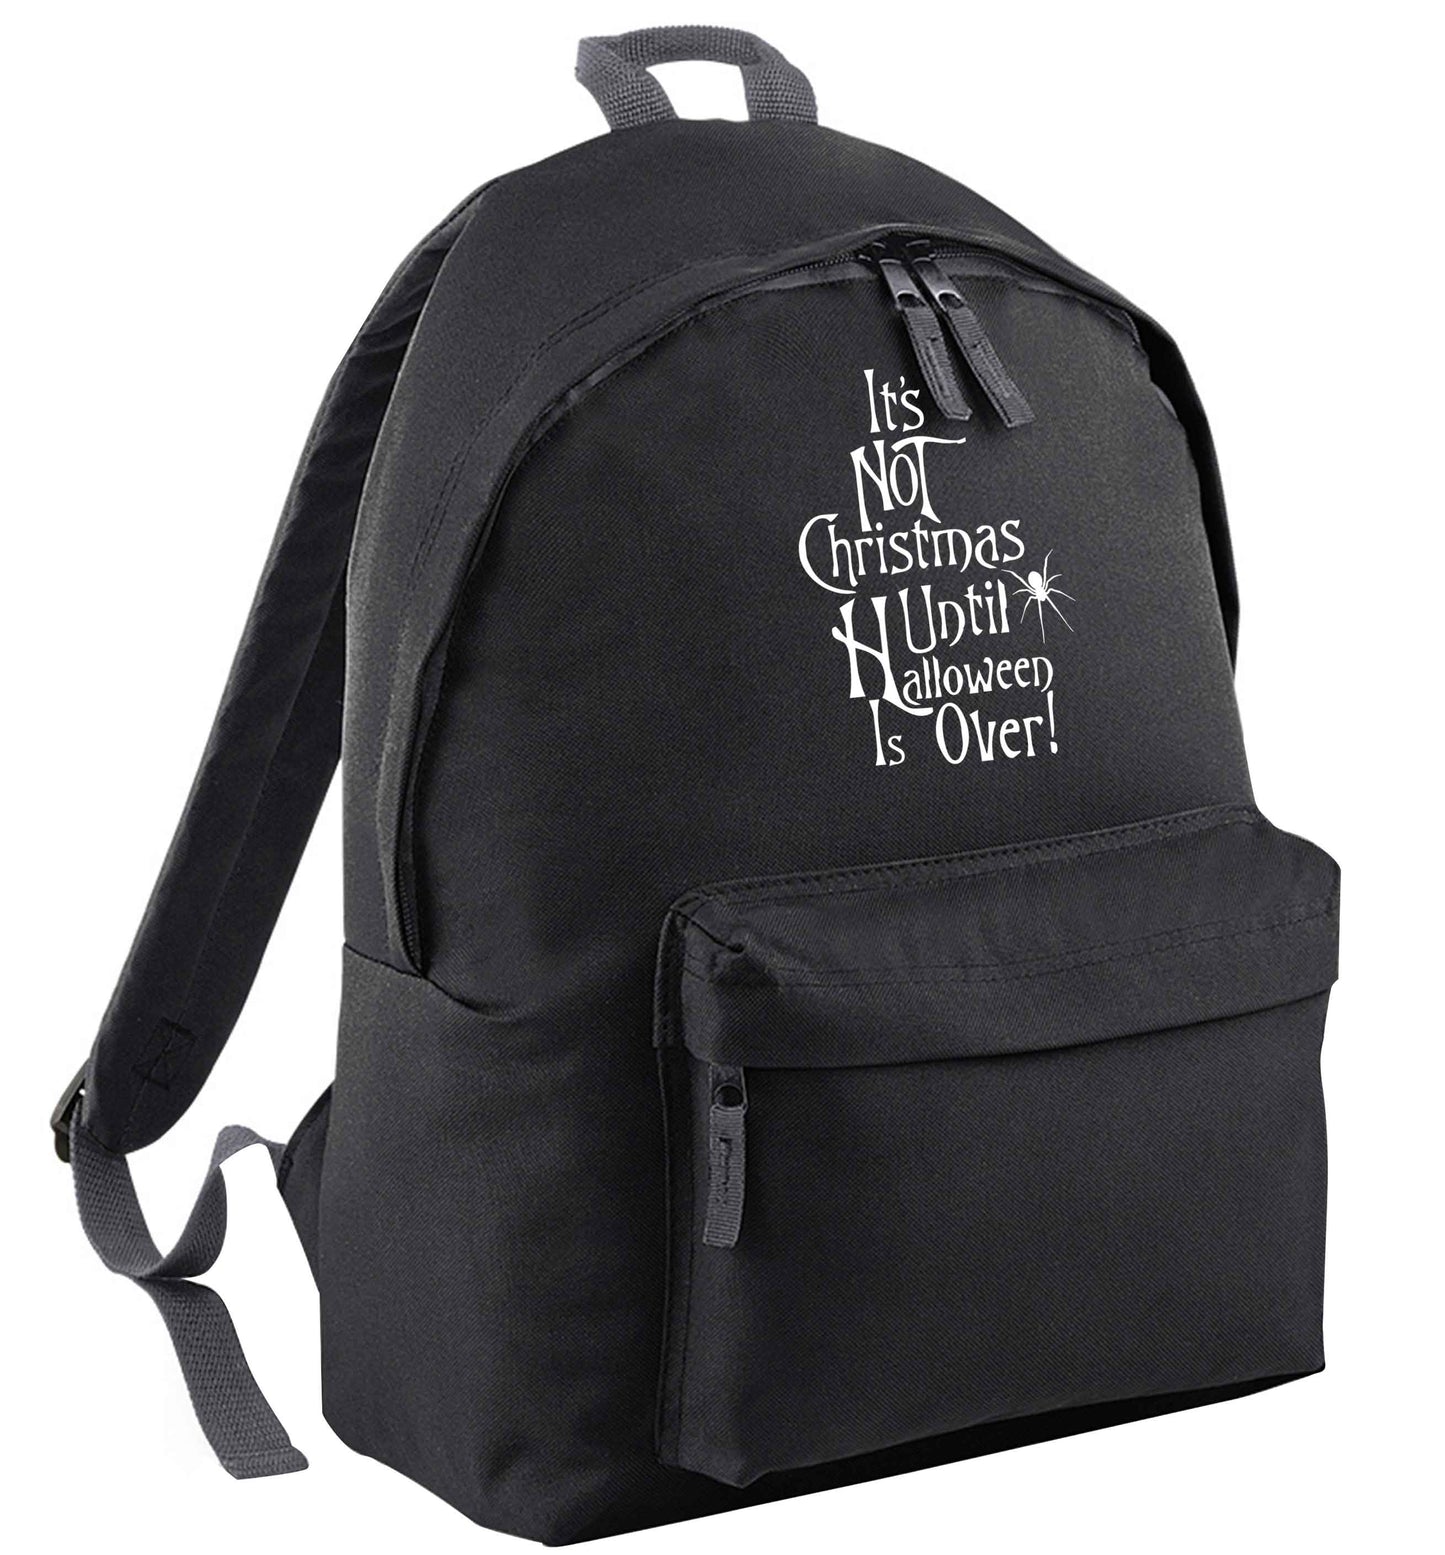 It's not Christmas until Halloween is over | Children's backpack